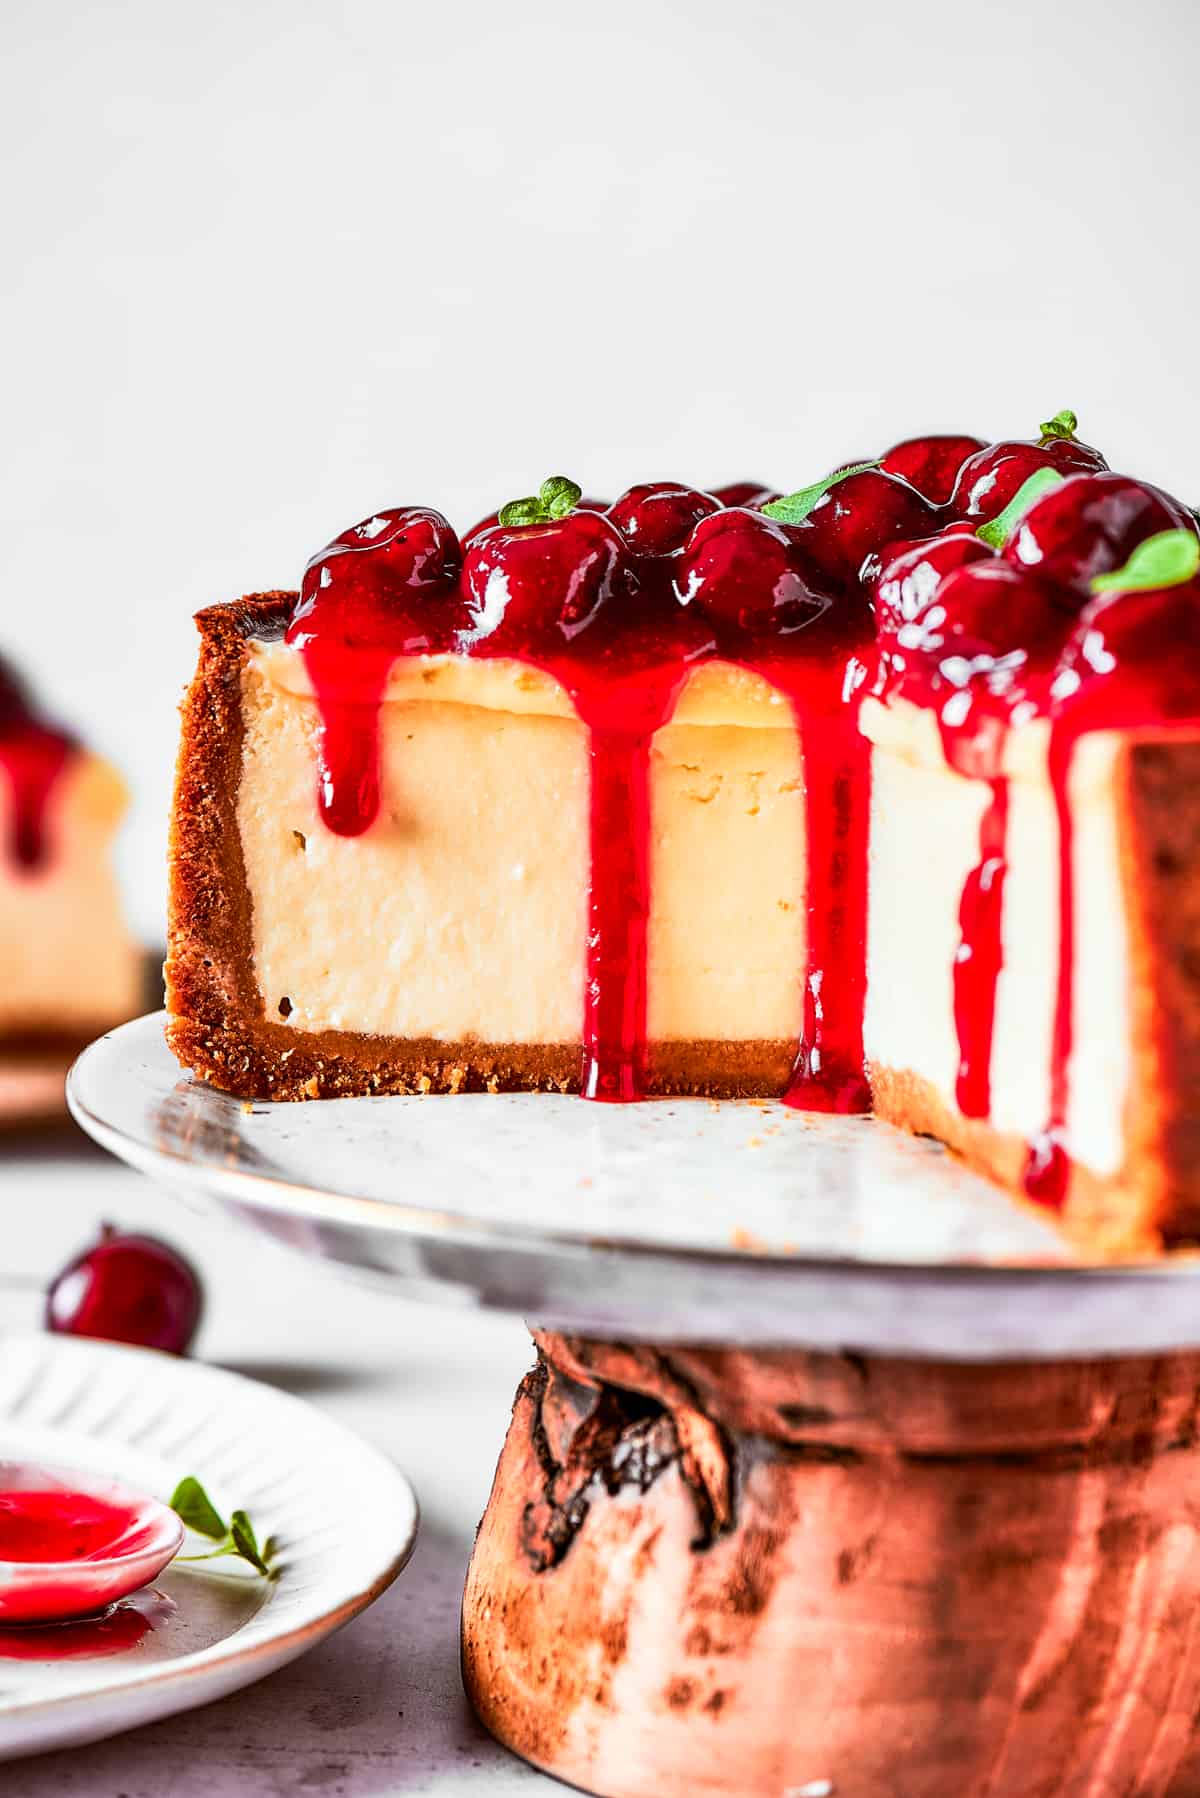 Cherry cheesecake on a cake stand.